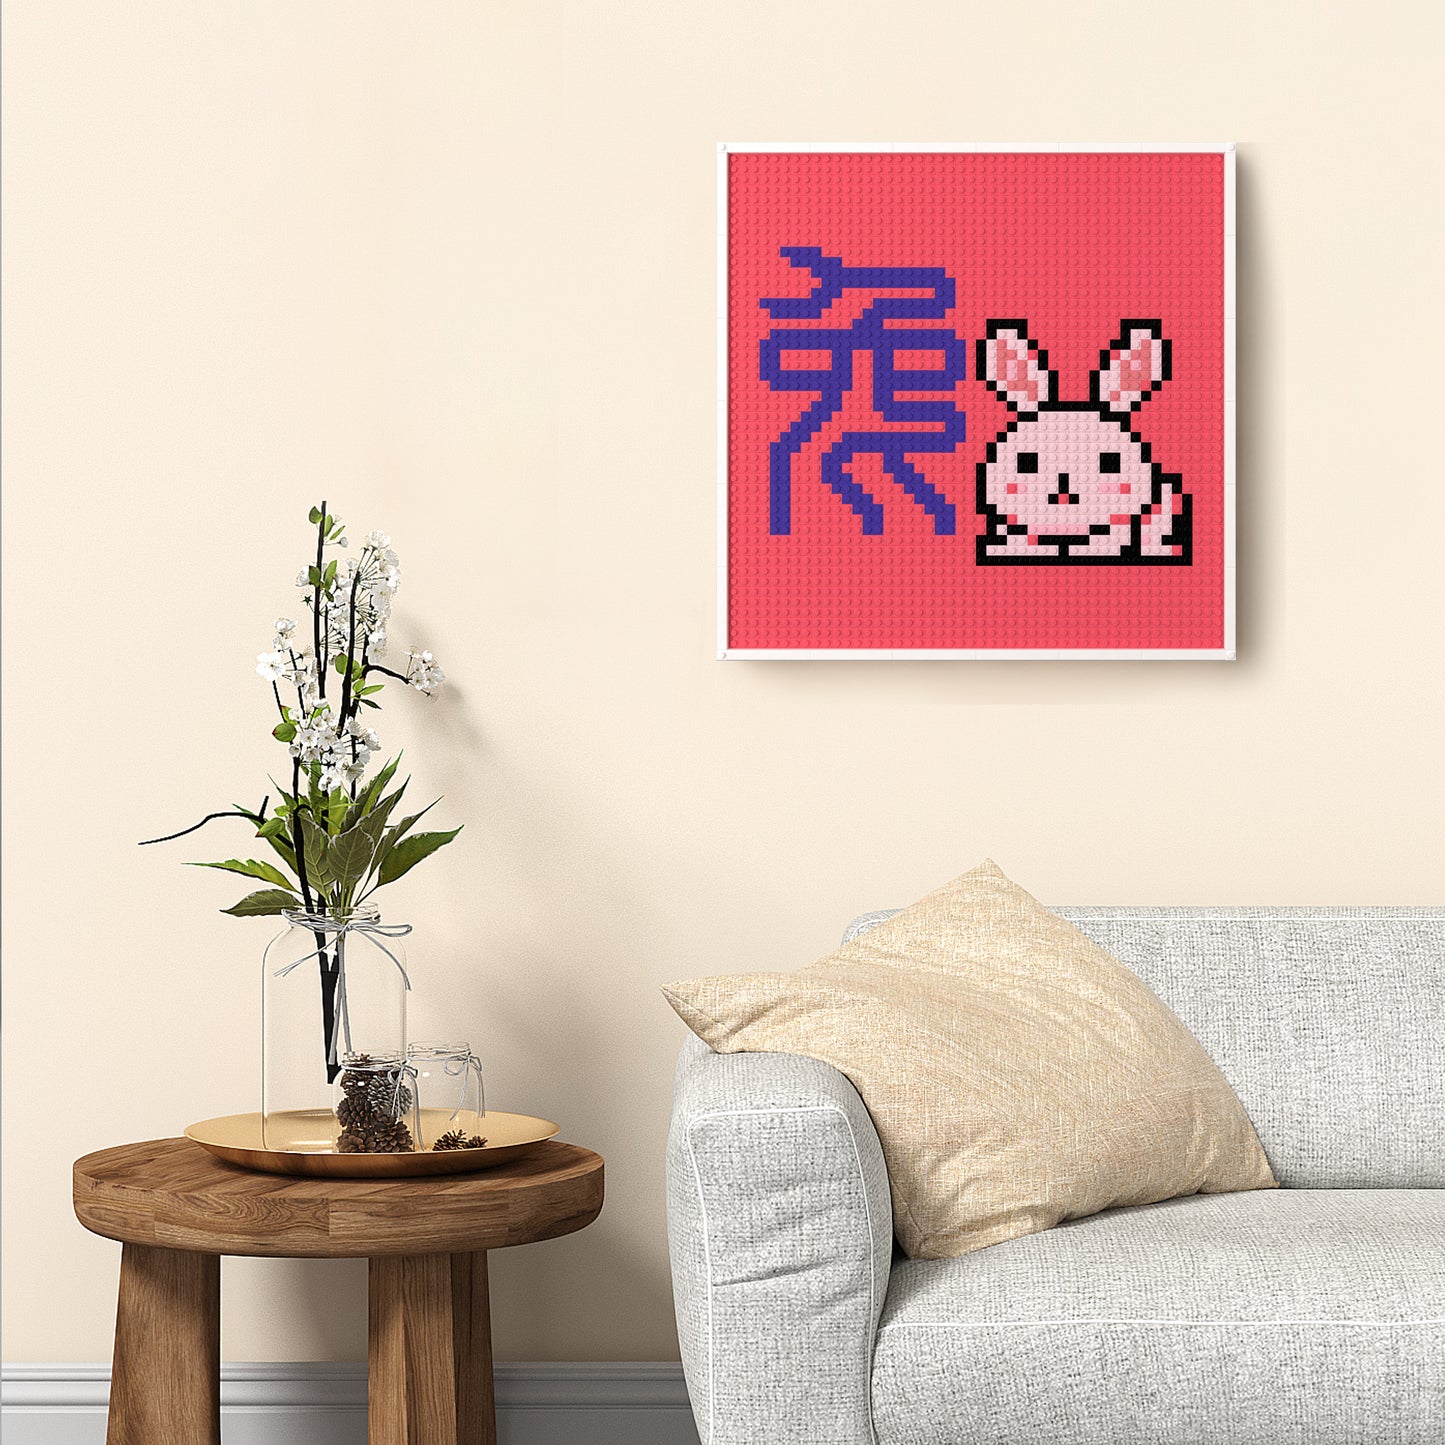 48*48 Dot Handmade Building Brick Pixel Art Chinese Zodiac Rabbit Customized Chinese Traditional Culture Artwork Best Gift for Friends of Rabbit